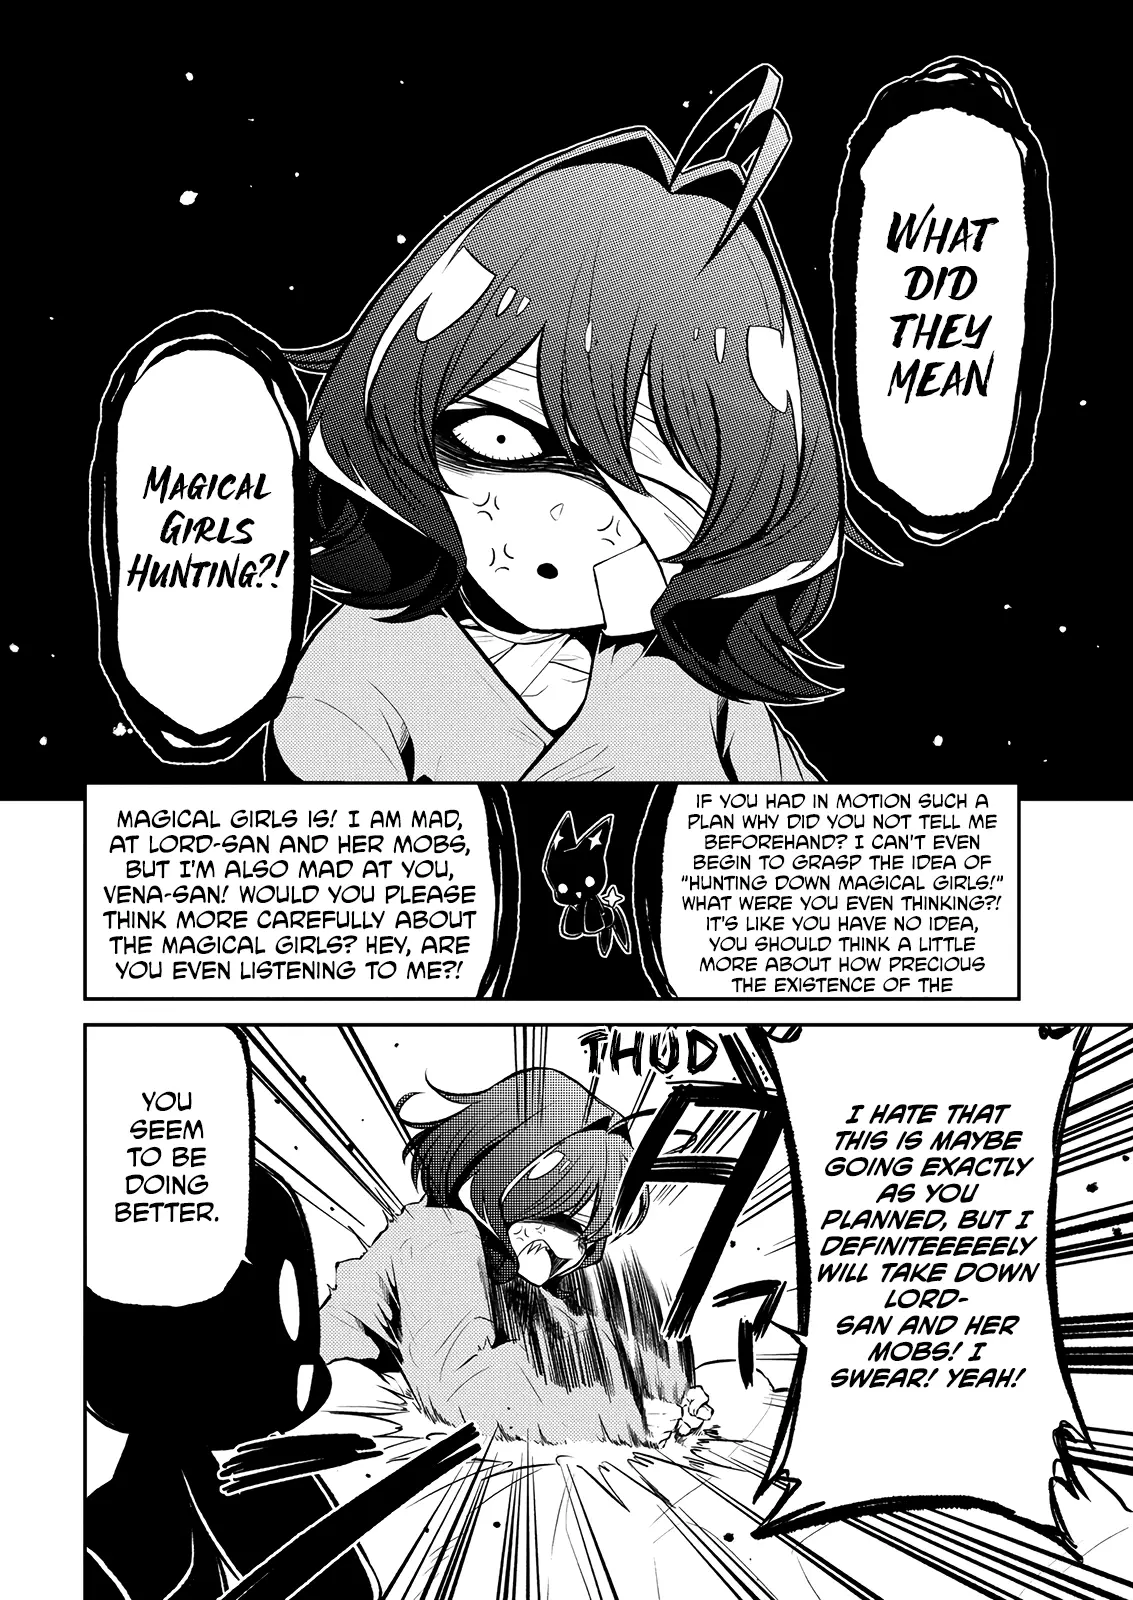 Looking Up To Magical Girls - 13 page 7